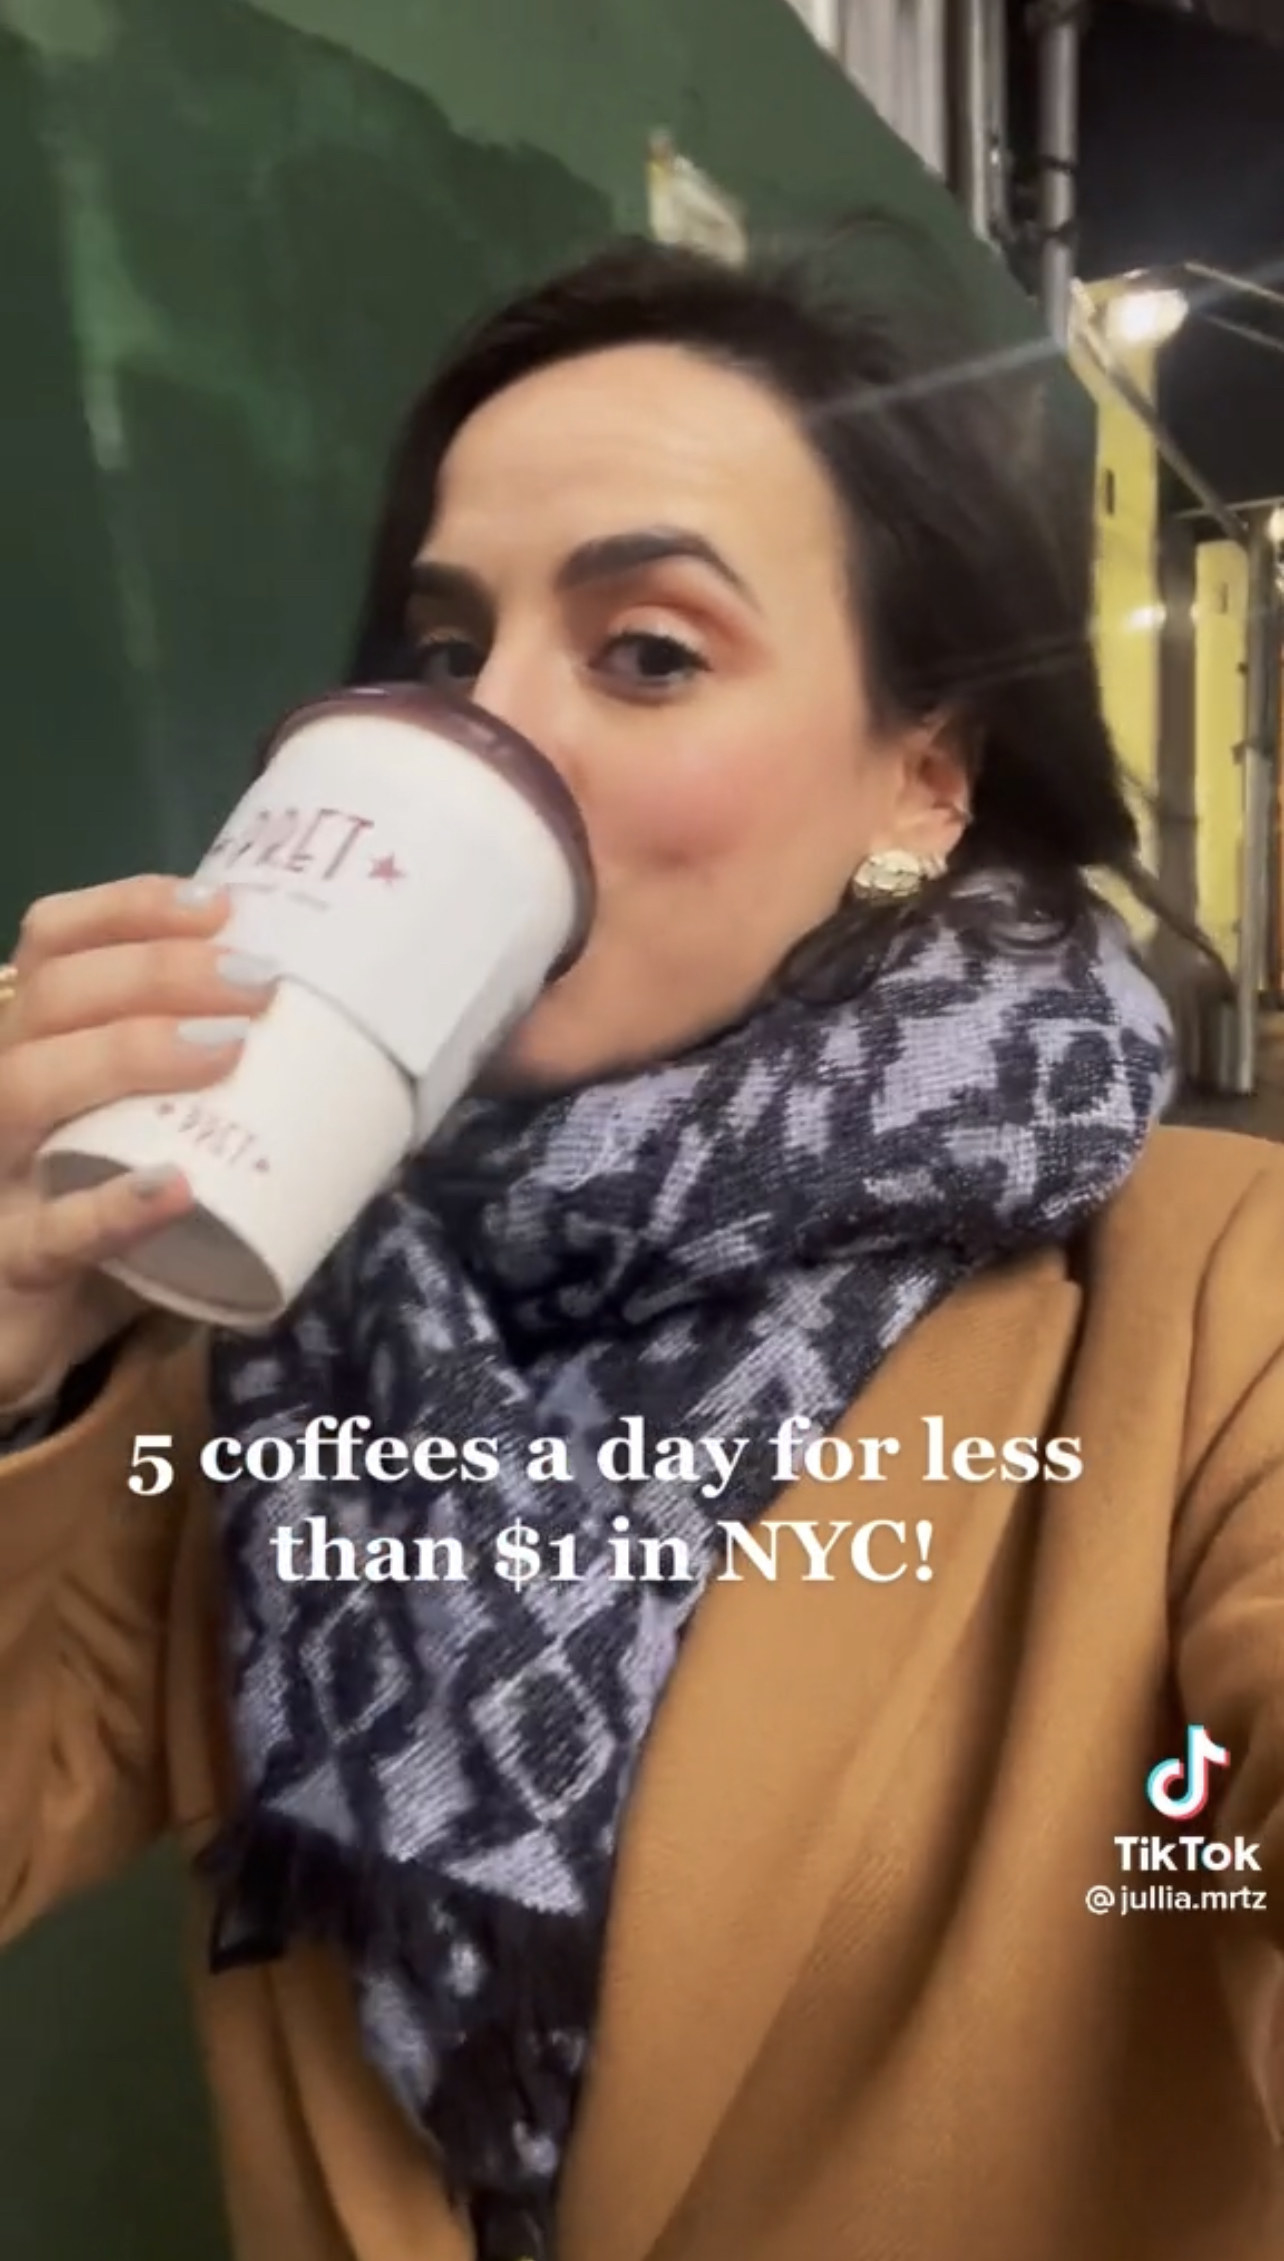 Woman drinking coffee with the text &quot;Getting 5 coffees a day for less than $1 in NYC!&quot;